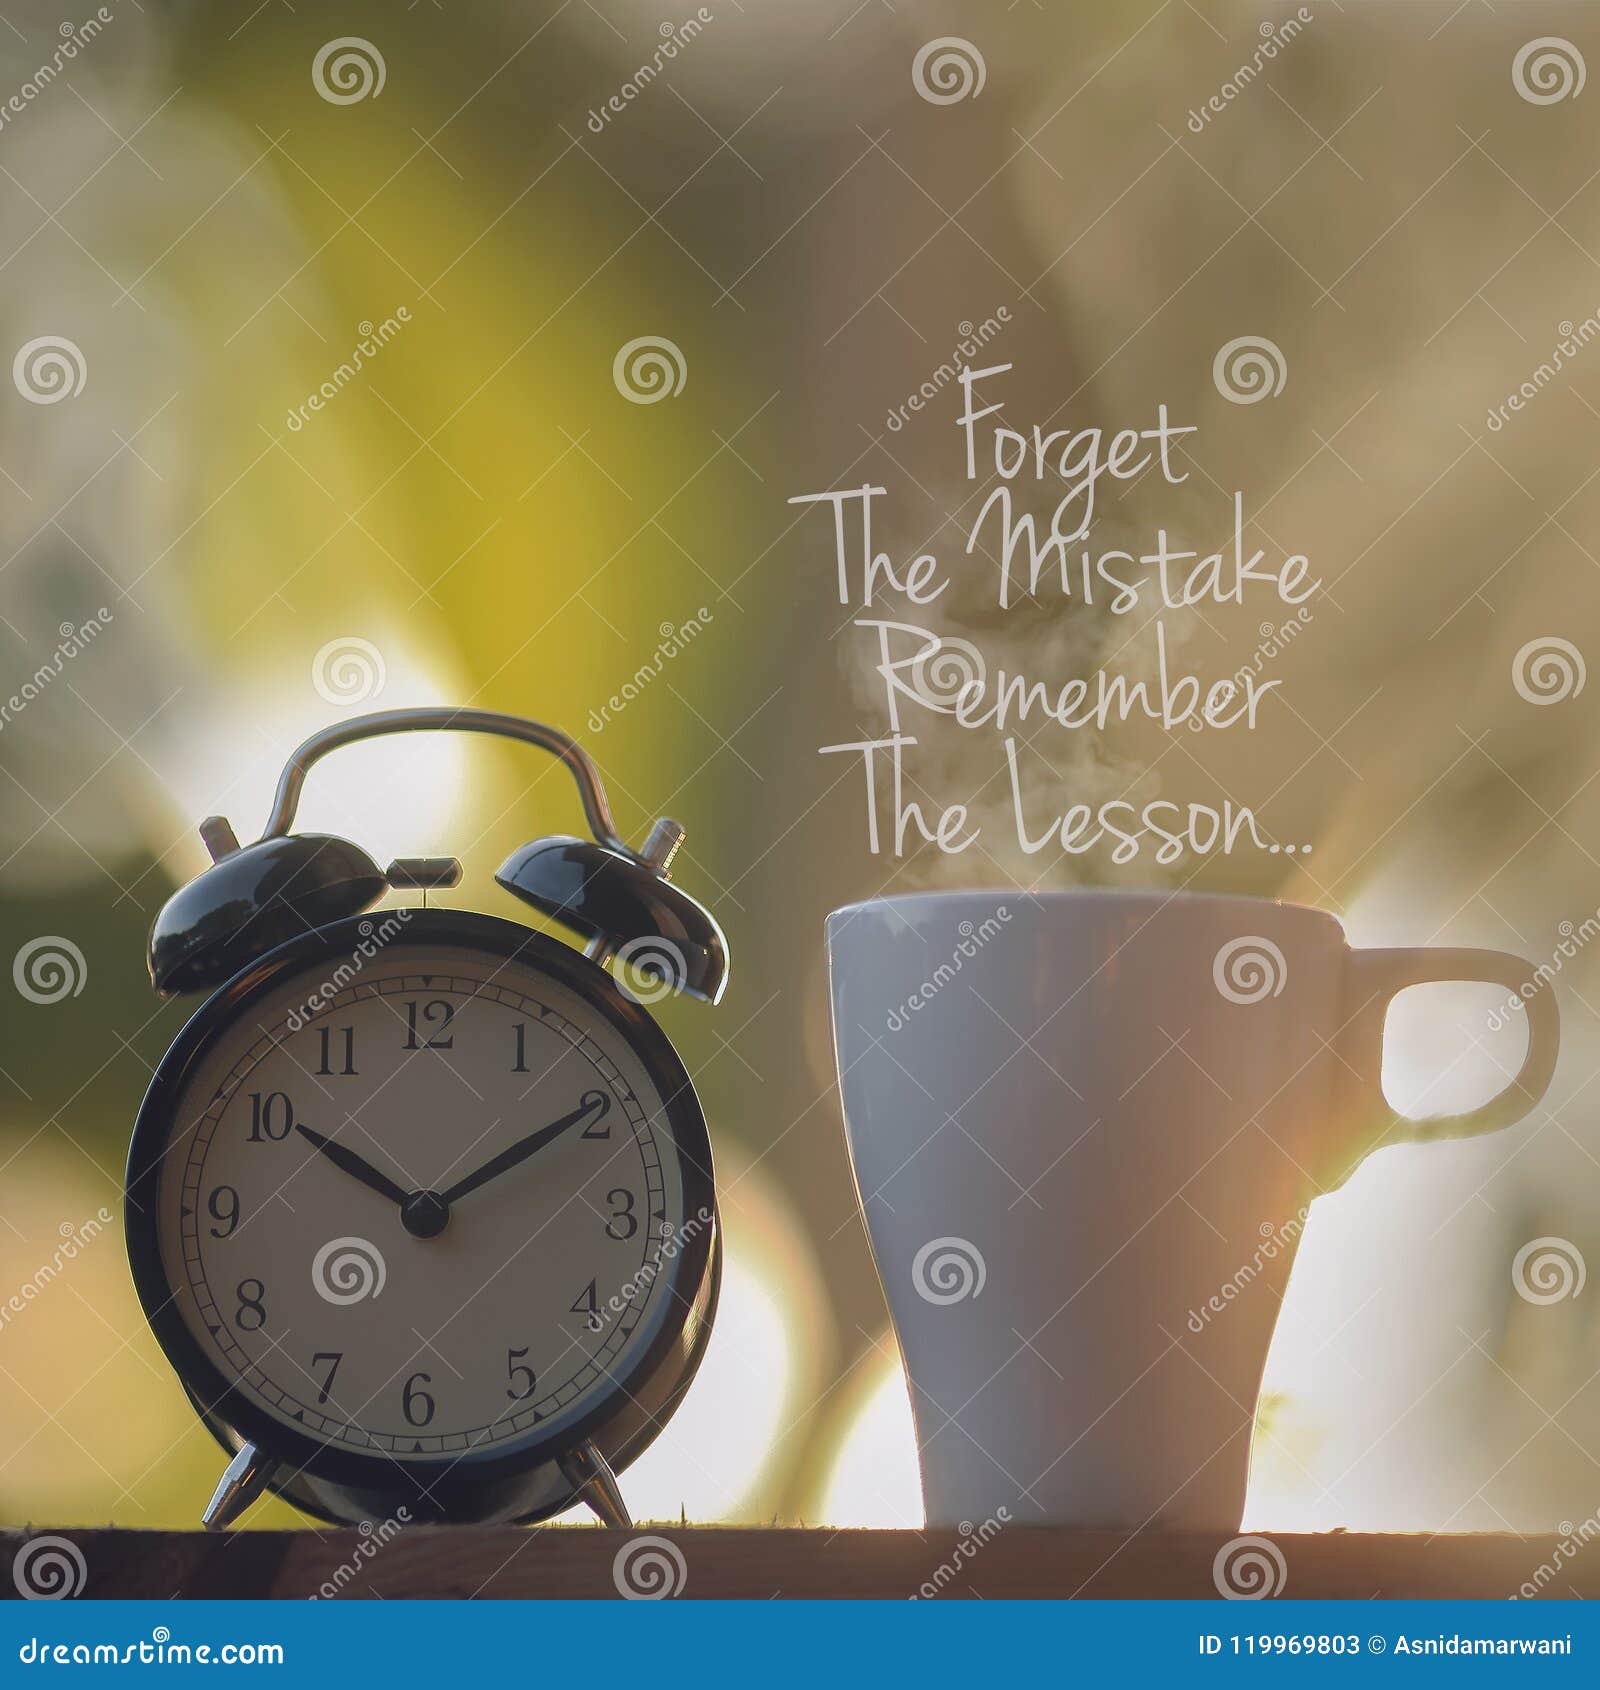 inspirational quotes - forget the mistake. remember the lesson.black alarm clock and a cup of coffee on the morning.